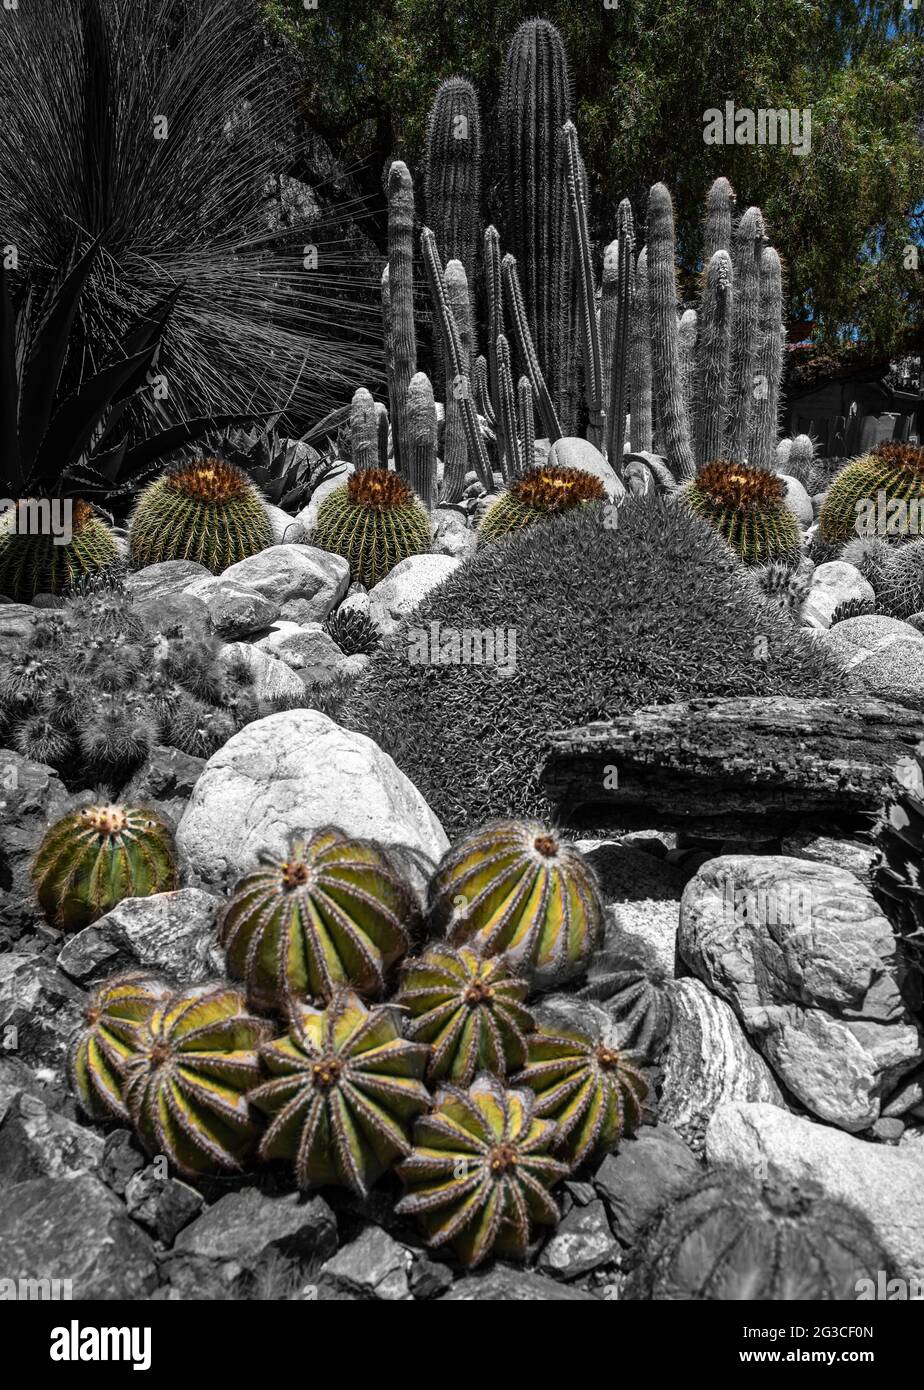 A cactus garden featuring a variety of cactus and succulents. Stock Photo